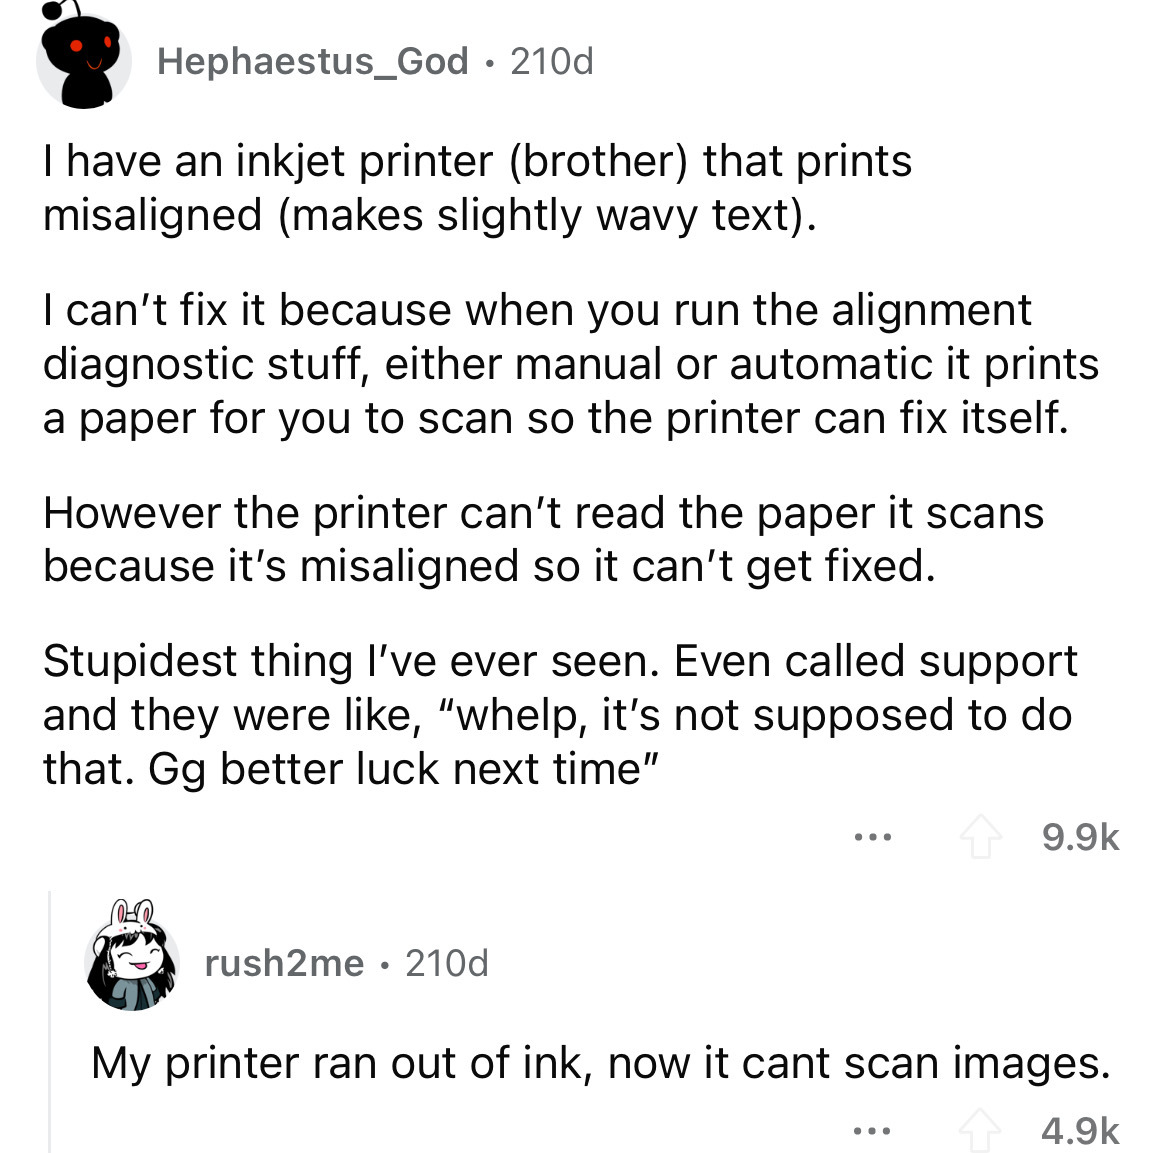 number - Hephaestus_God 210d . I have an inkjet printer brother that prints misaligned makes slightly wavy text. I can't fix it because when you run the alignment diagnostic stuff, either manual or automatic it prints a paper for you to scan so the printe